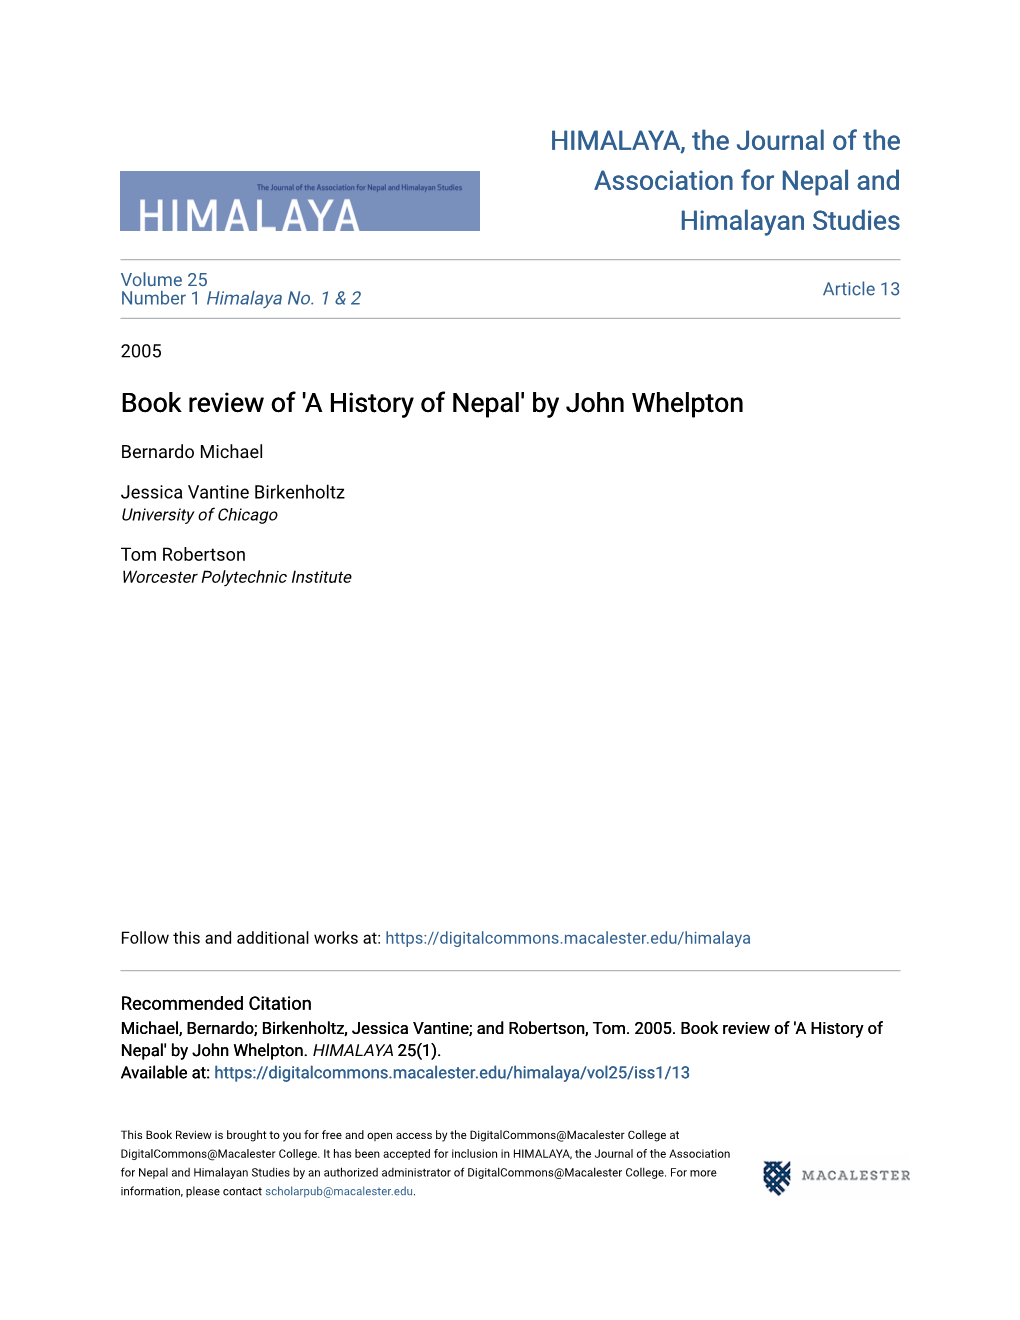 'A History of Nepal' by John Whelpton